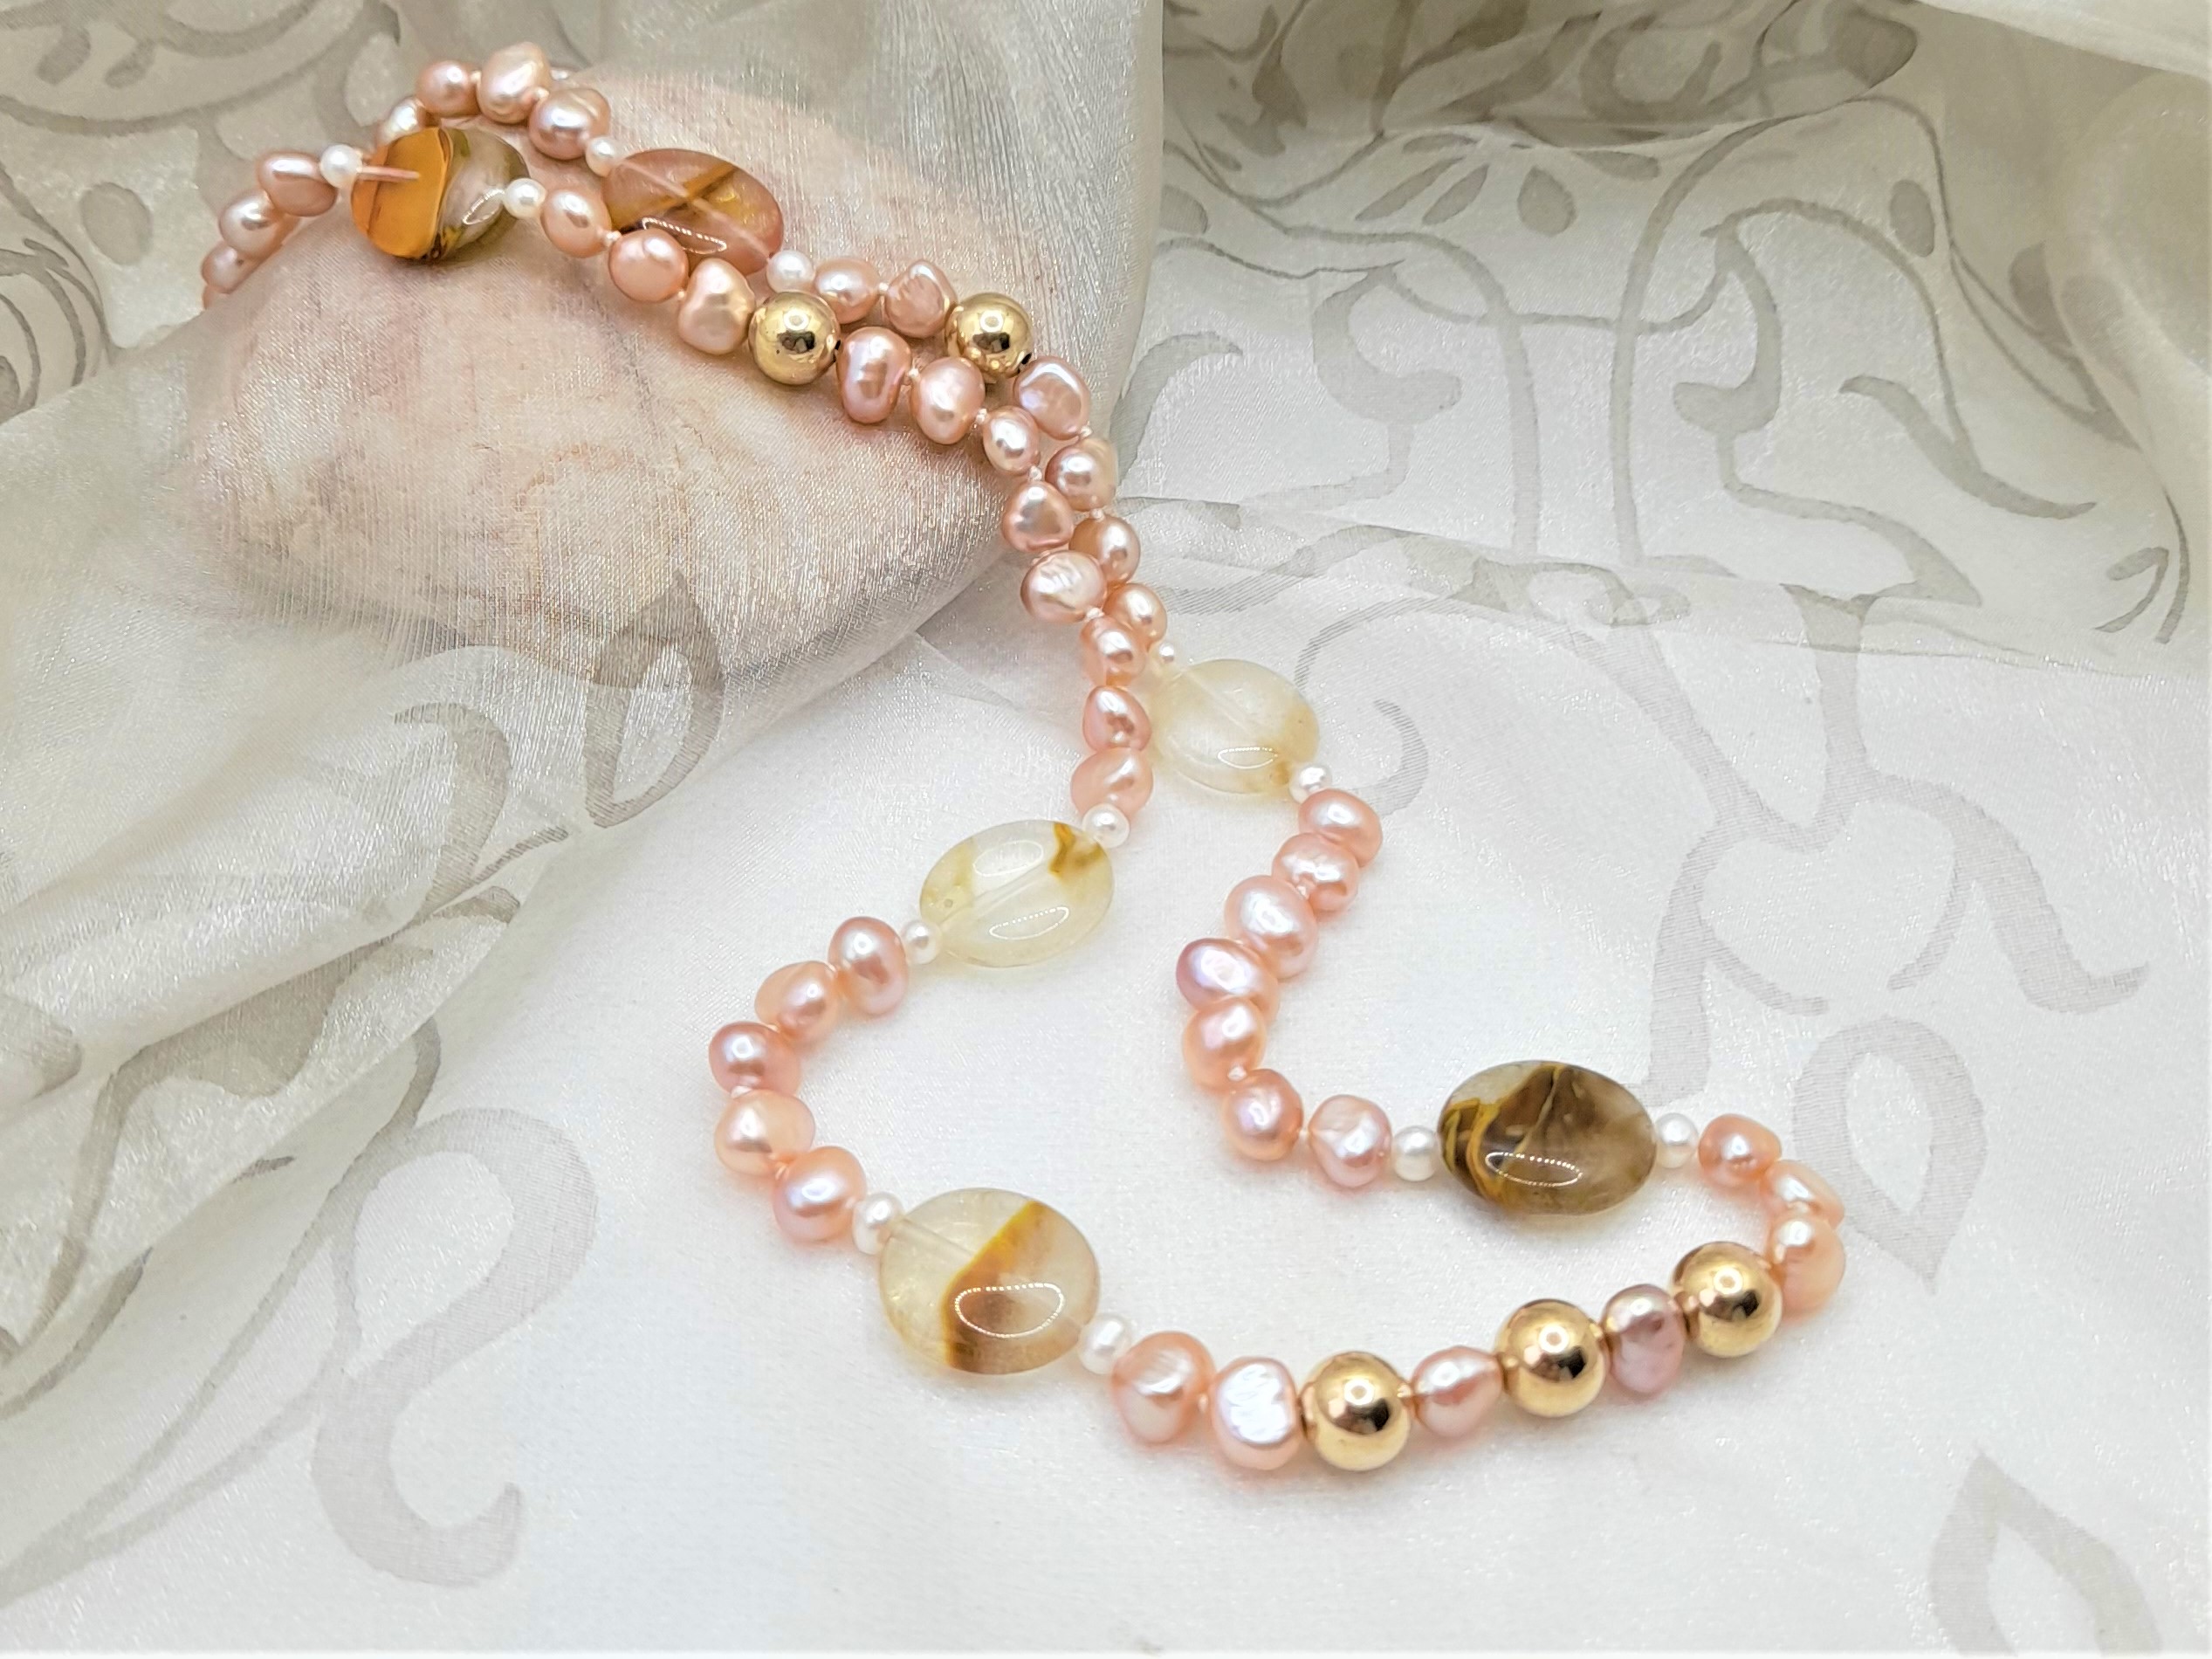 Subtle Pink Freshwater Pearl Necklace enhanced with the warm tones of pebble shape Banded Agate, with gold bead detail by Pearl Perfect.